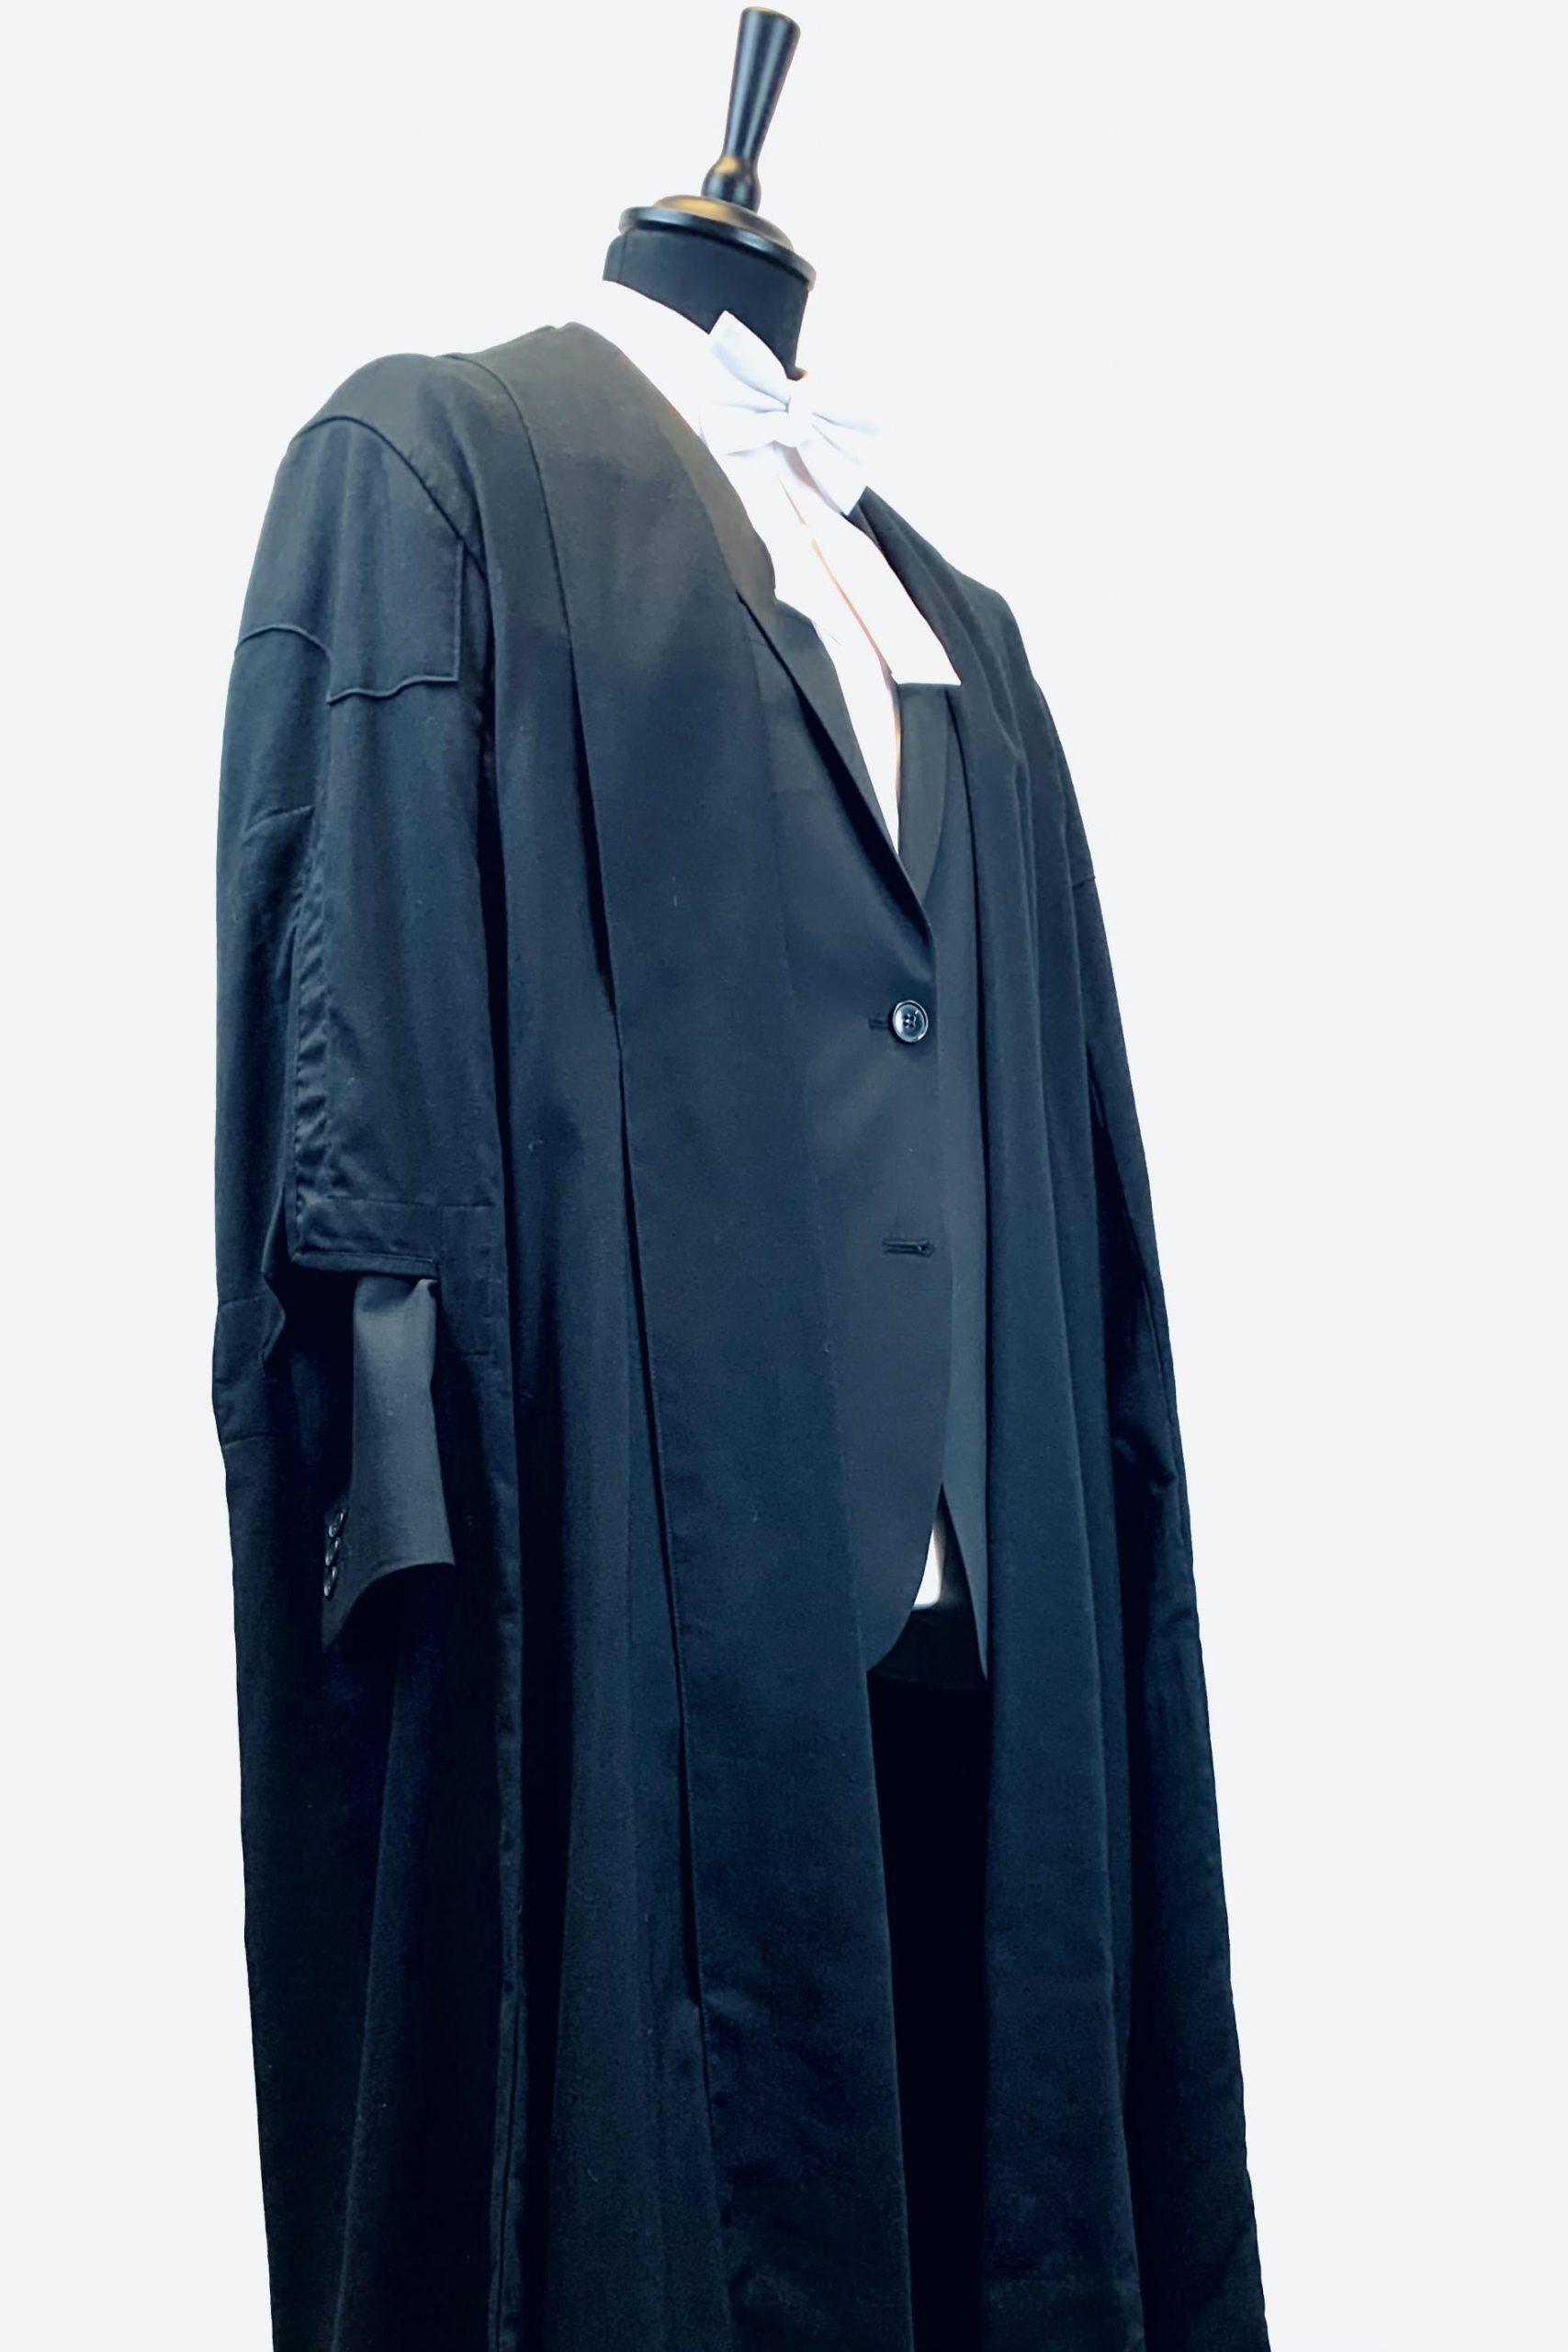 Covid-19 virus dilutes heavy colonial dress code for judges and lawyers |  India News - Times of India